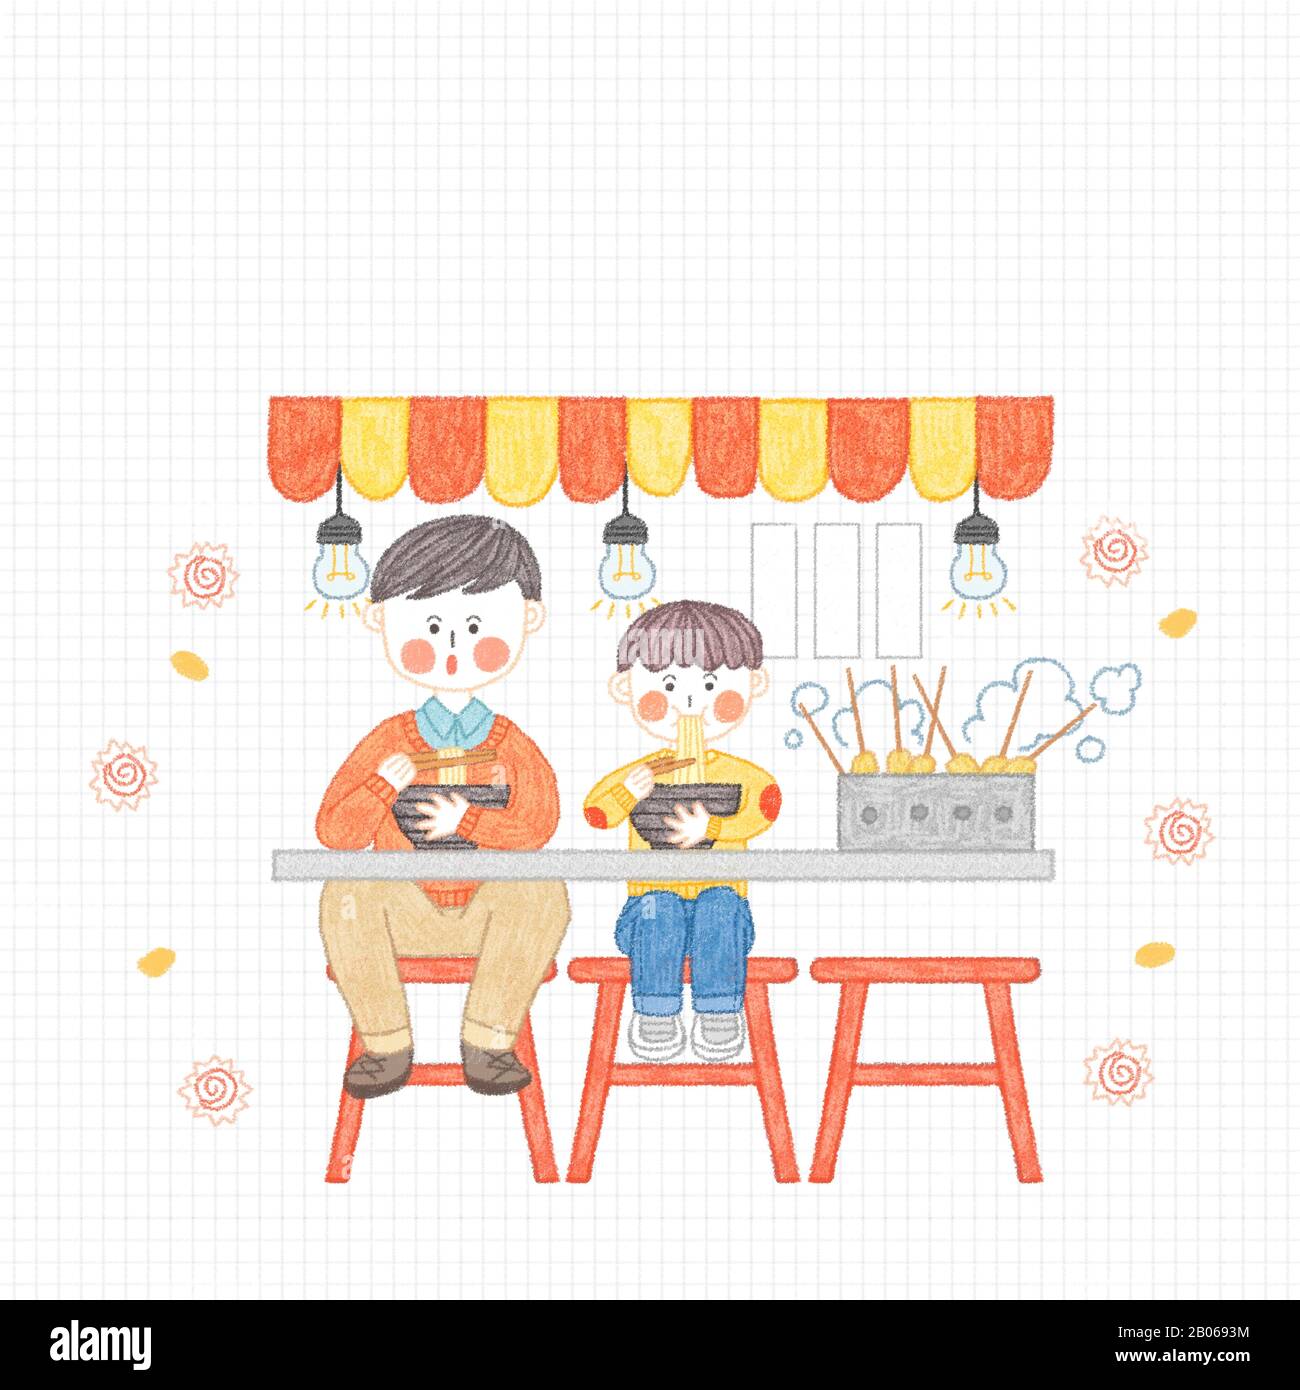 Happy time of family in winter illustration 011 Stock Vector